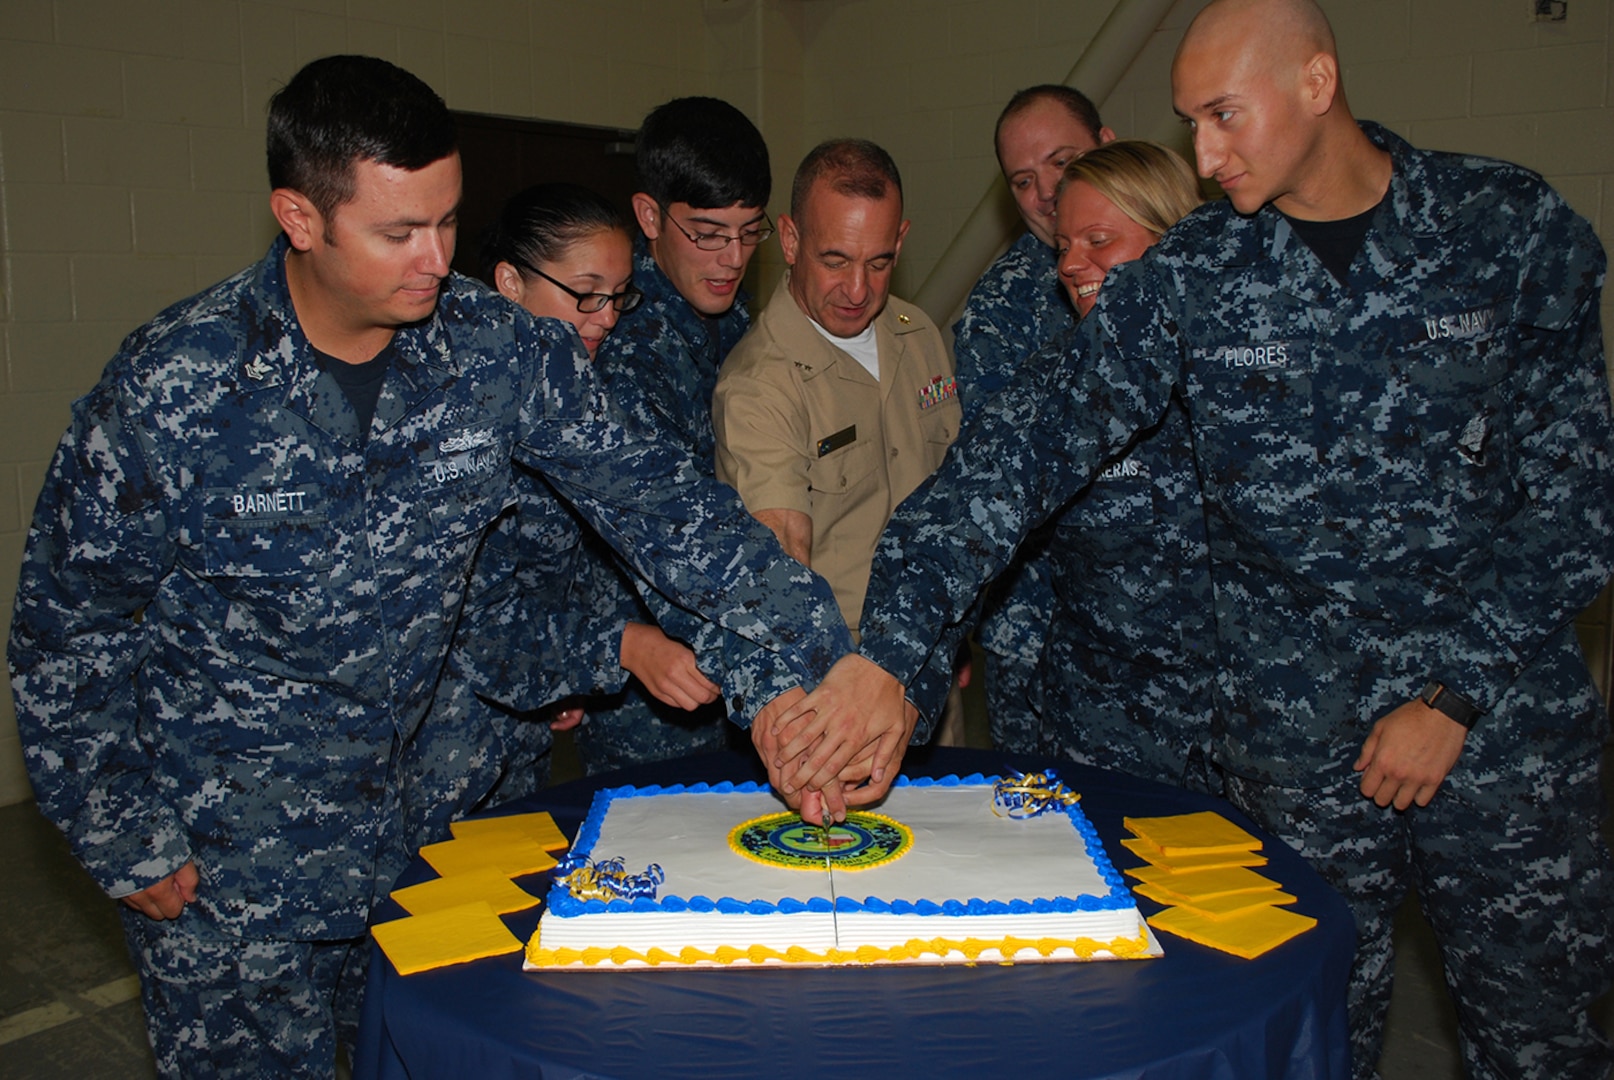 Rear Adm. William Roberts, commandant, Medical, Education and Training Campus, center, and fellow Sailors cut a cake during the June 25 ribbon-cutting ceremony officially opening the Wounded, Ill & Injured Annex at the Navy Operational Support Center, Joint Base San Antonio-Fort Sam Houston. The Annex will serve as an administrative liaison for Navy, Marine Corps and Coast Guard members receiving treatment through the San Antonio Military Medical Center at JBSH-FSH. Annex staff will also provide support to service members' families and a better means of communication, patient advocacy and navigation through complex medical issues while service members receive treatment. The Annex is a detachment of the Naval Health Clinic Corpus Christi.